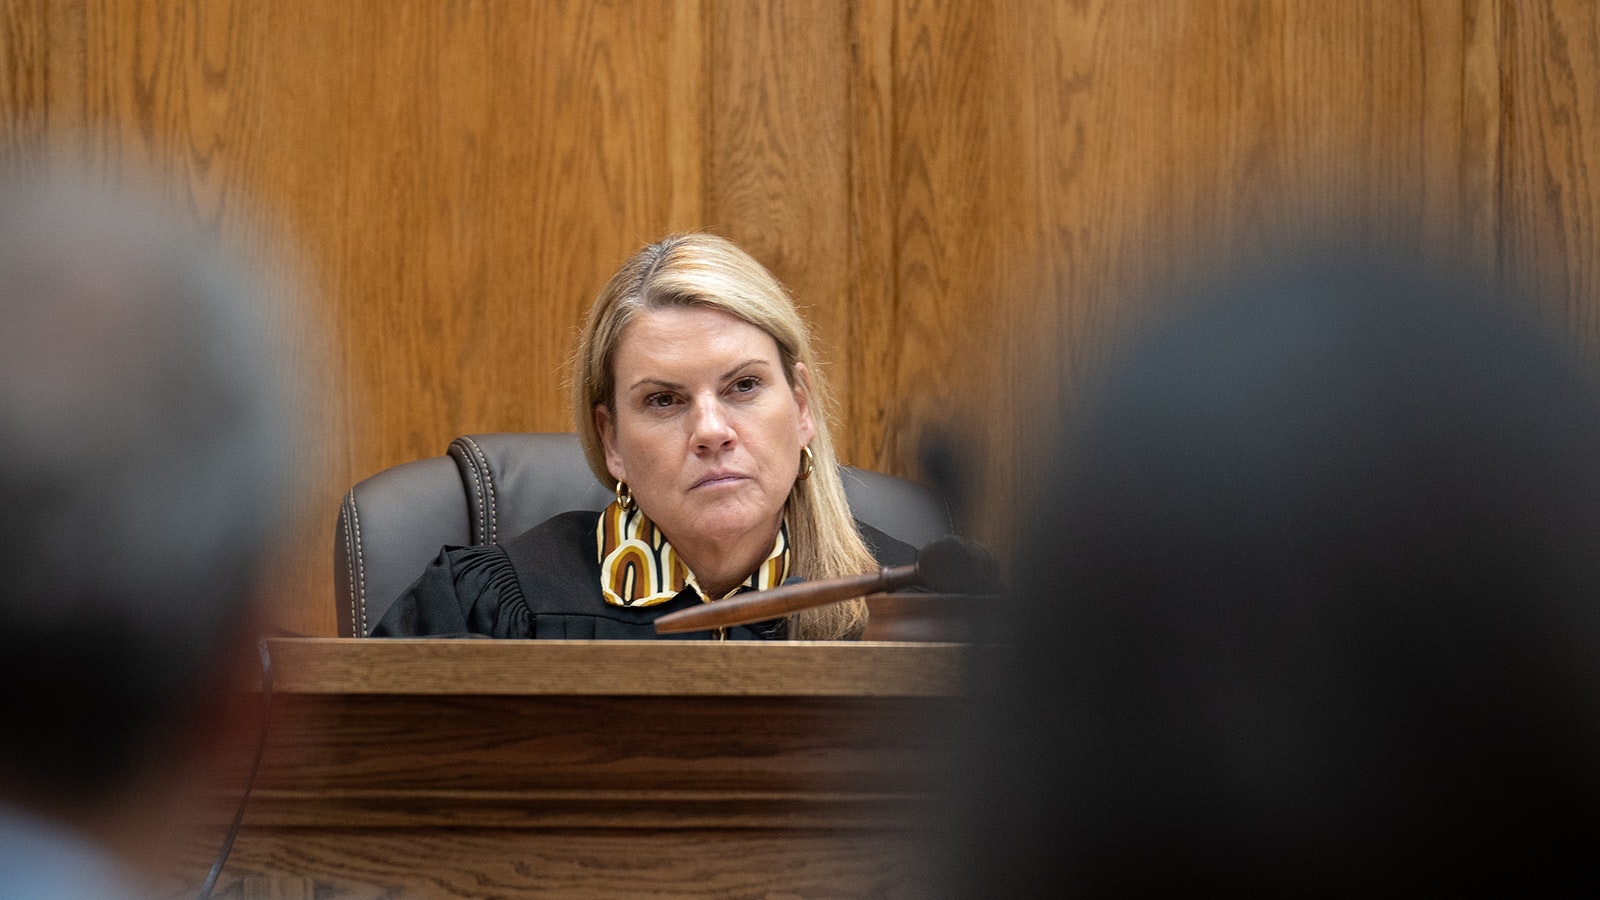 Judge Melissa Owens listens as Jay Jerde, special assistant attorney general for the state, addresses the court during a summary judgment hearing Thursday in Teton County District Court. Following nearly four hours of arguments, Owens did not make a ruling from the bench, leaving the fate of abortion access in Wyoming undecided.